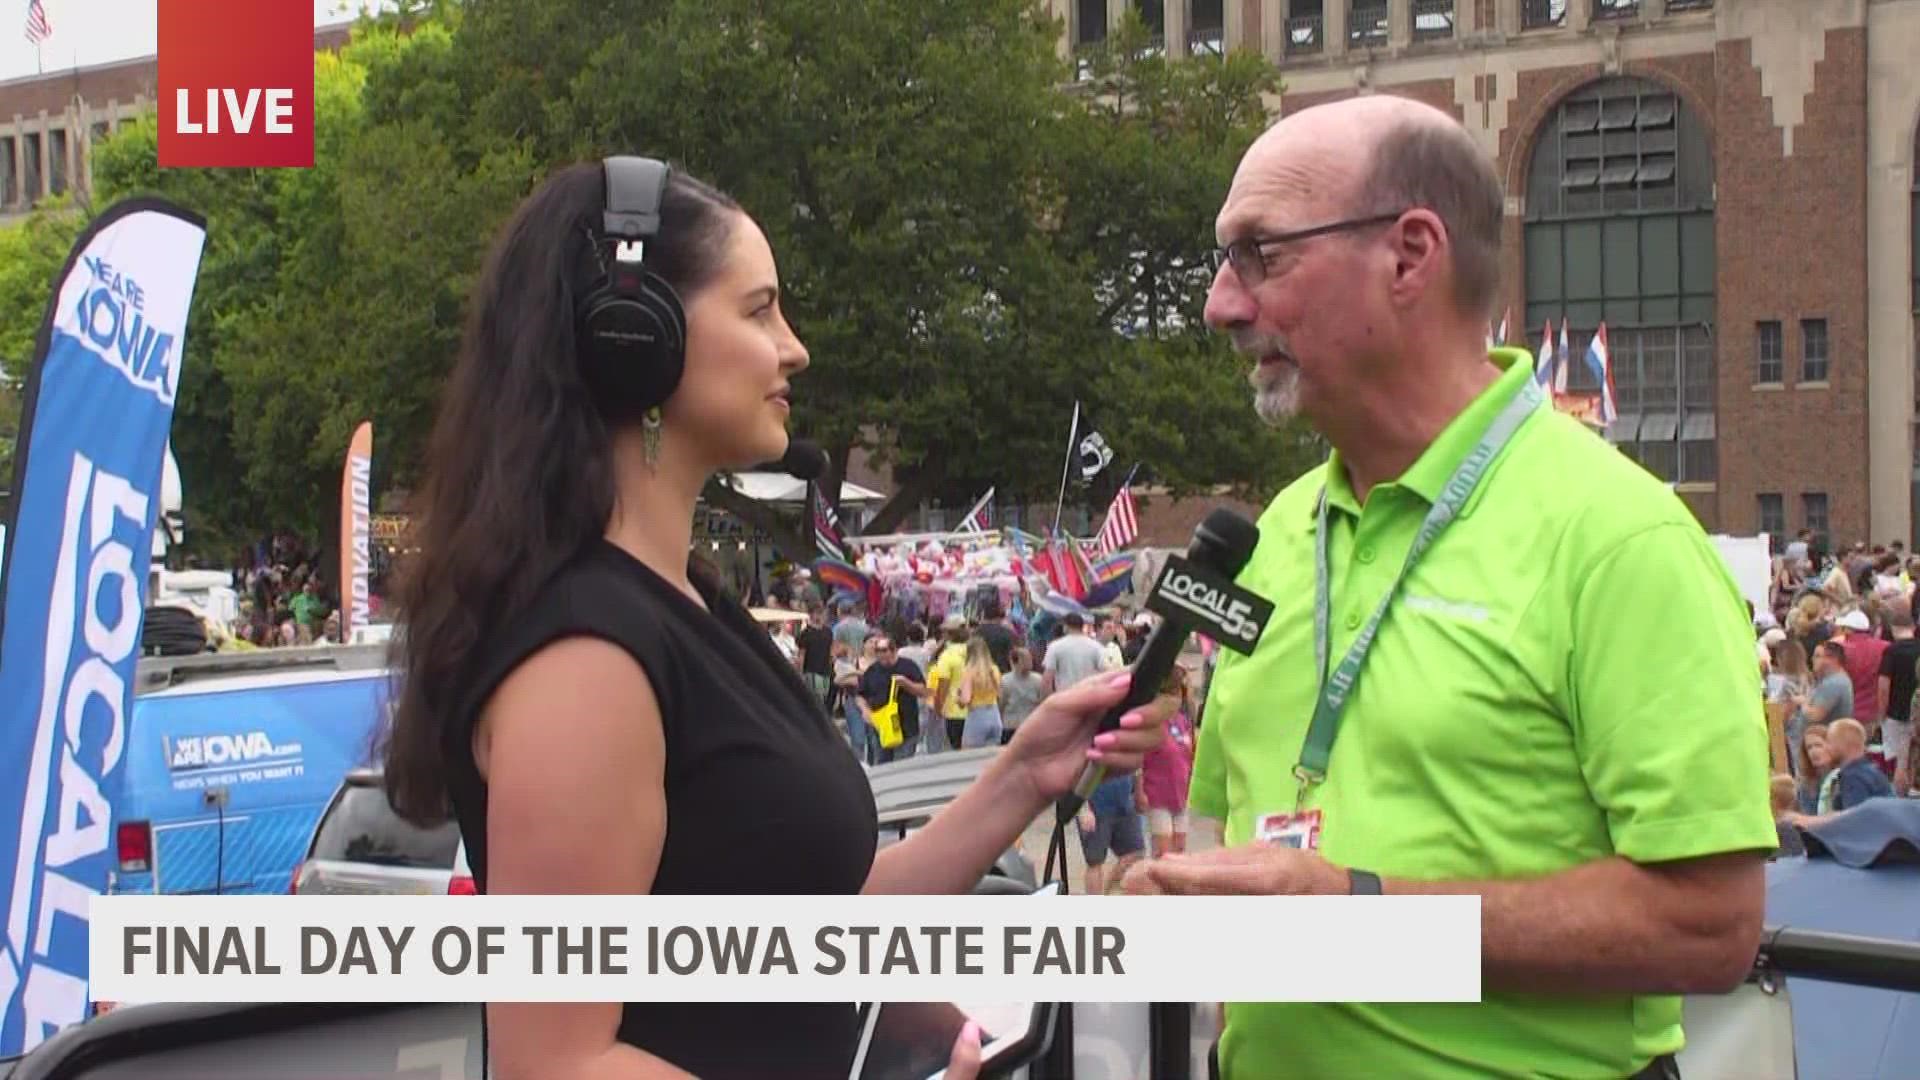 Slater discusses breaking records, severe weather and everything else that occurred over the 11-day fair.